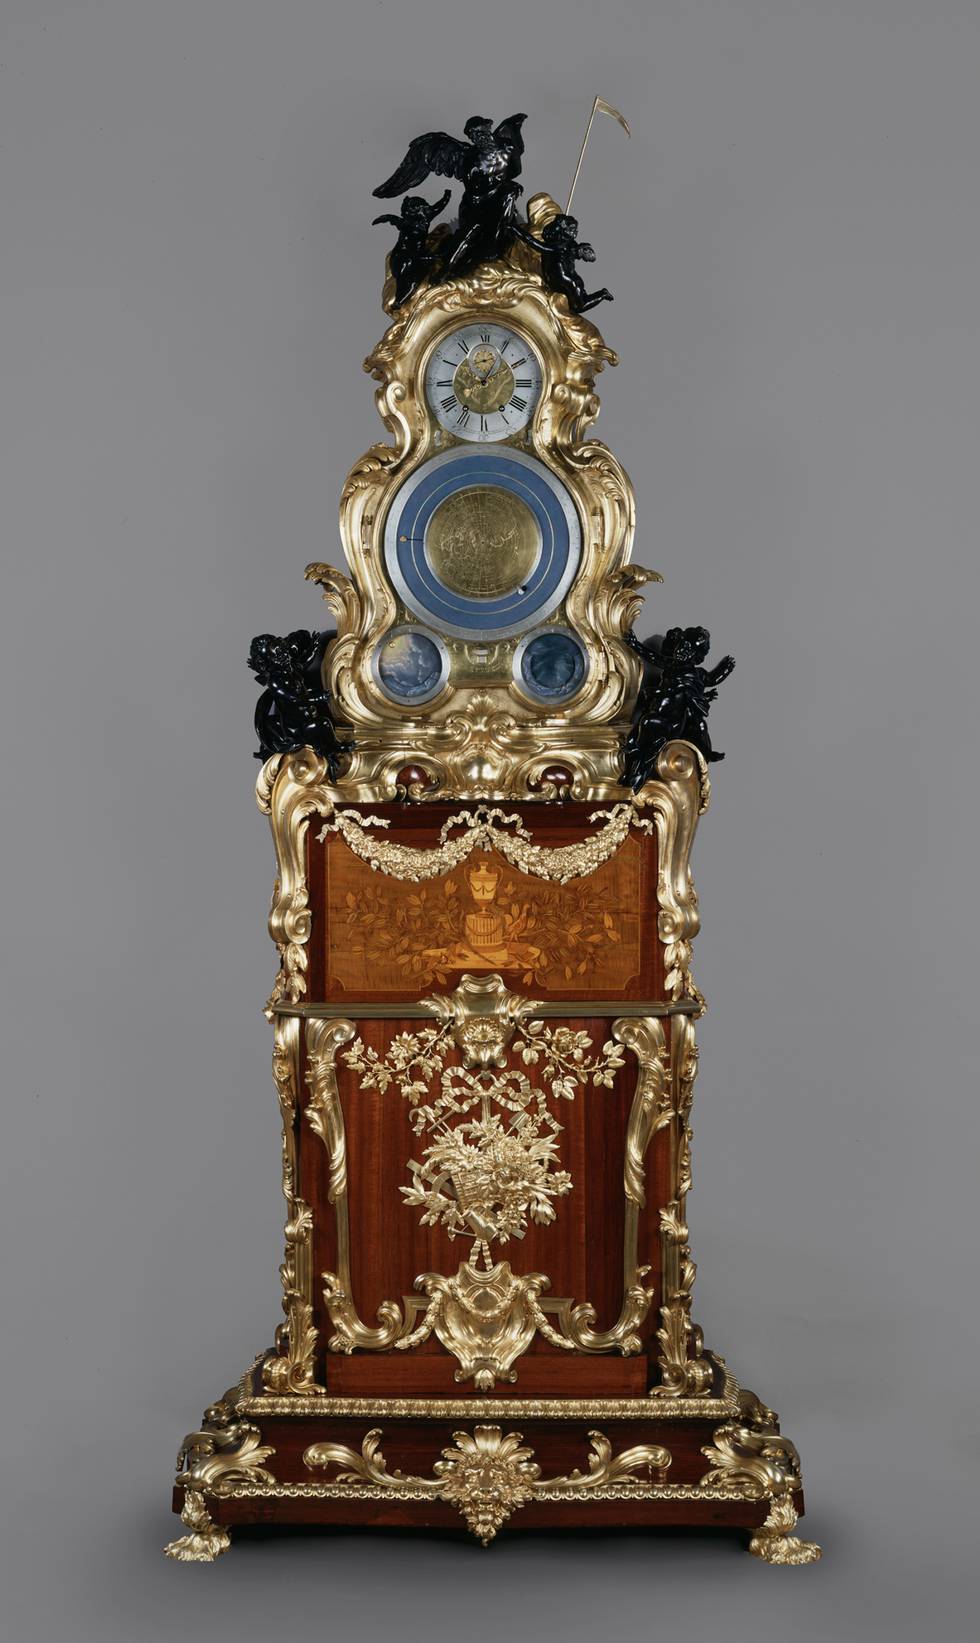 Wooden and gilt bronze clock, with four dials on front